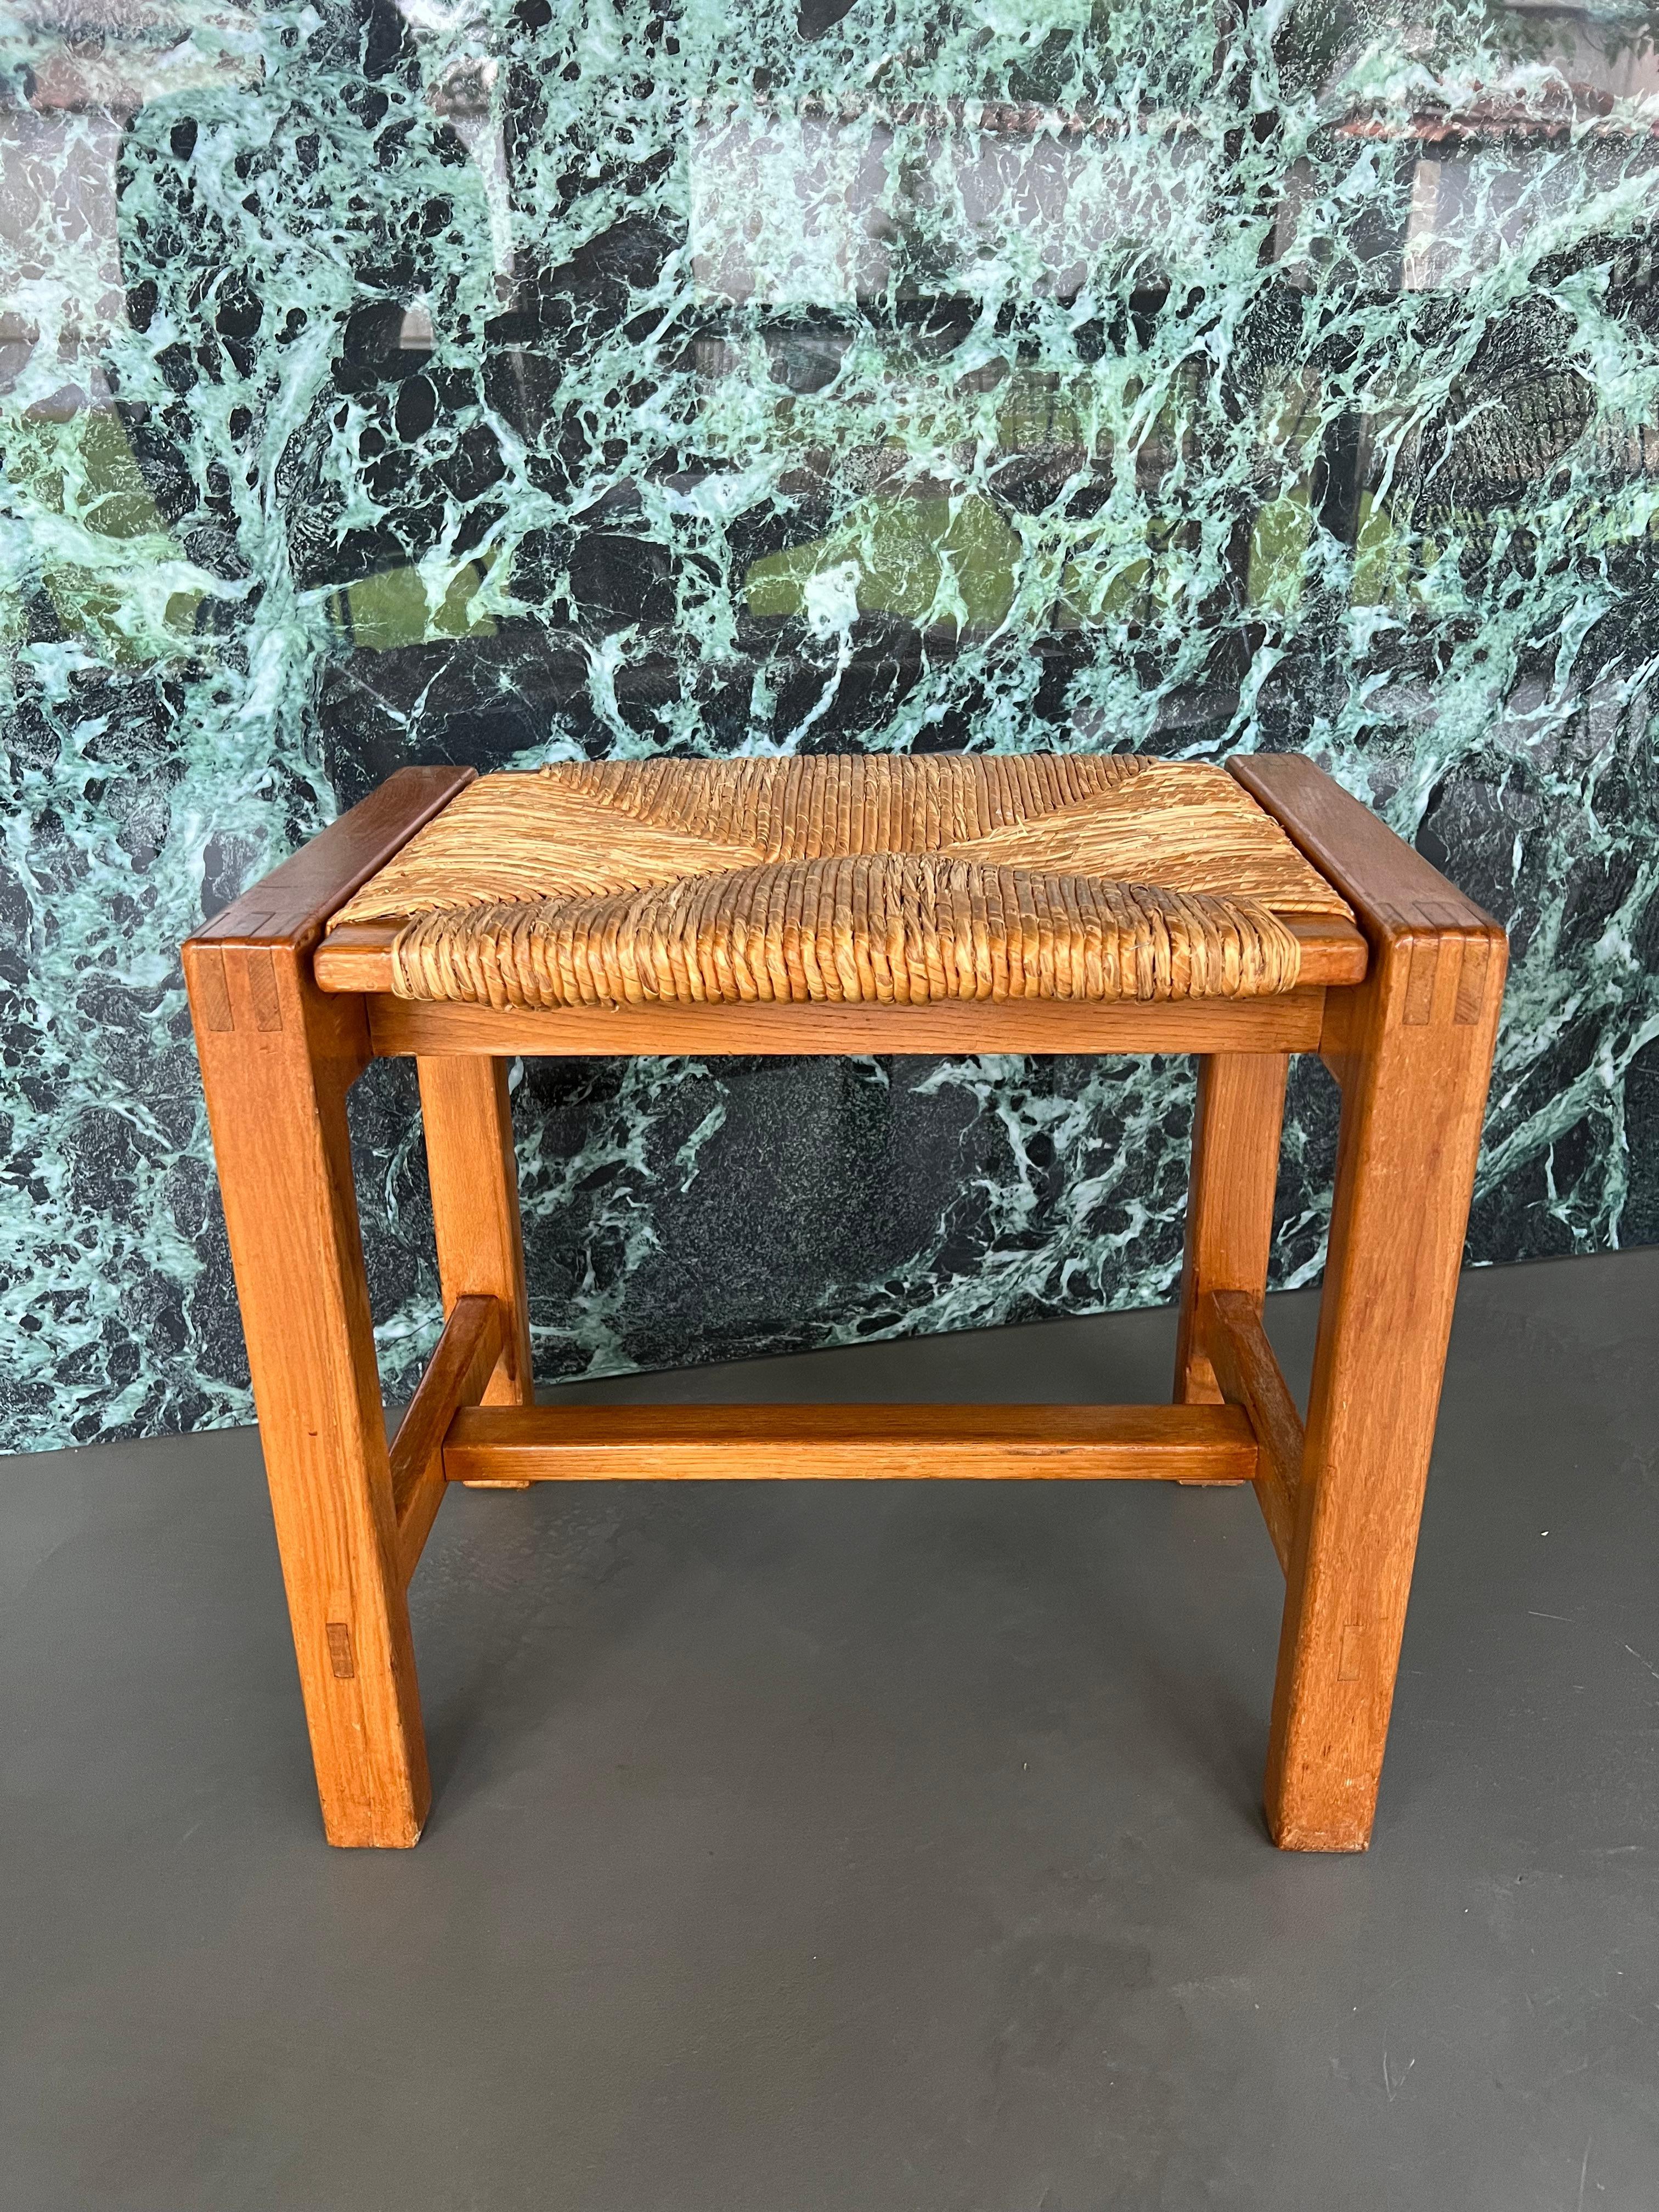 Superb stool in solid oak and straw produced by Maison Regain in the 1970s. In excellent condition, its sumptuous mortise and tenon joints give it a very special elegance. A great Classic.